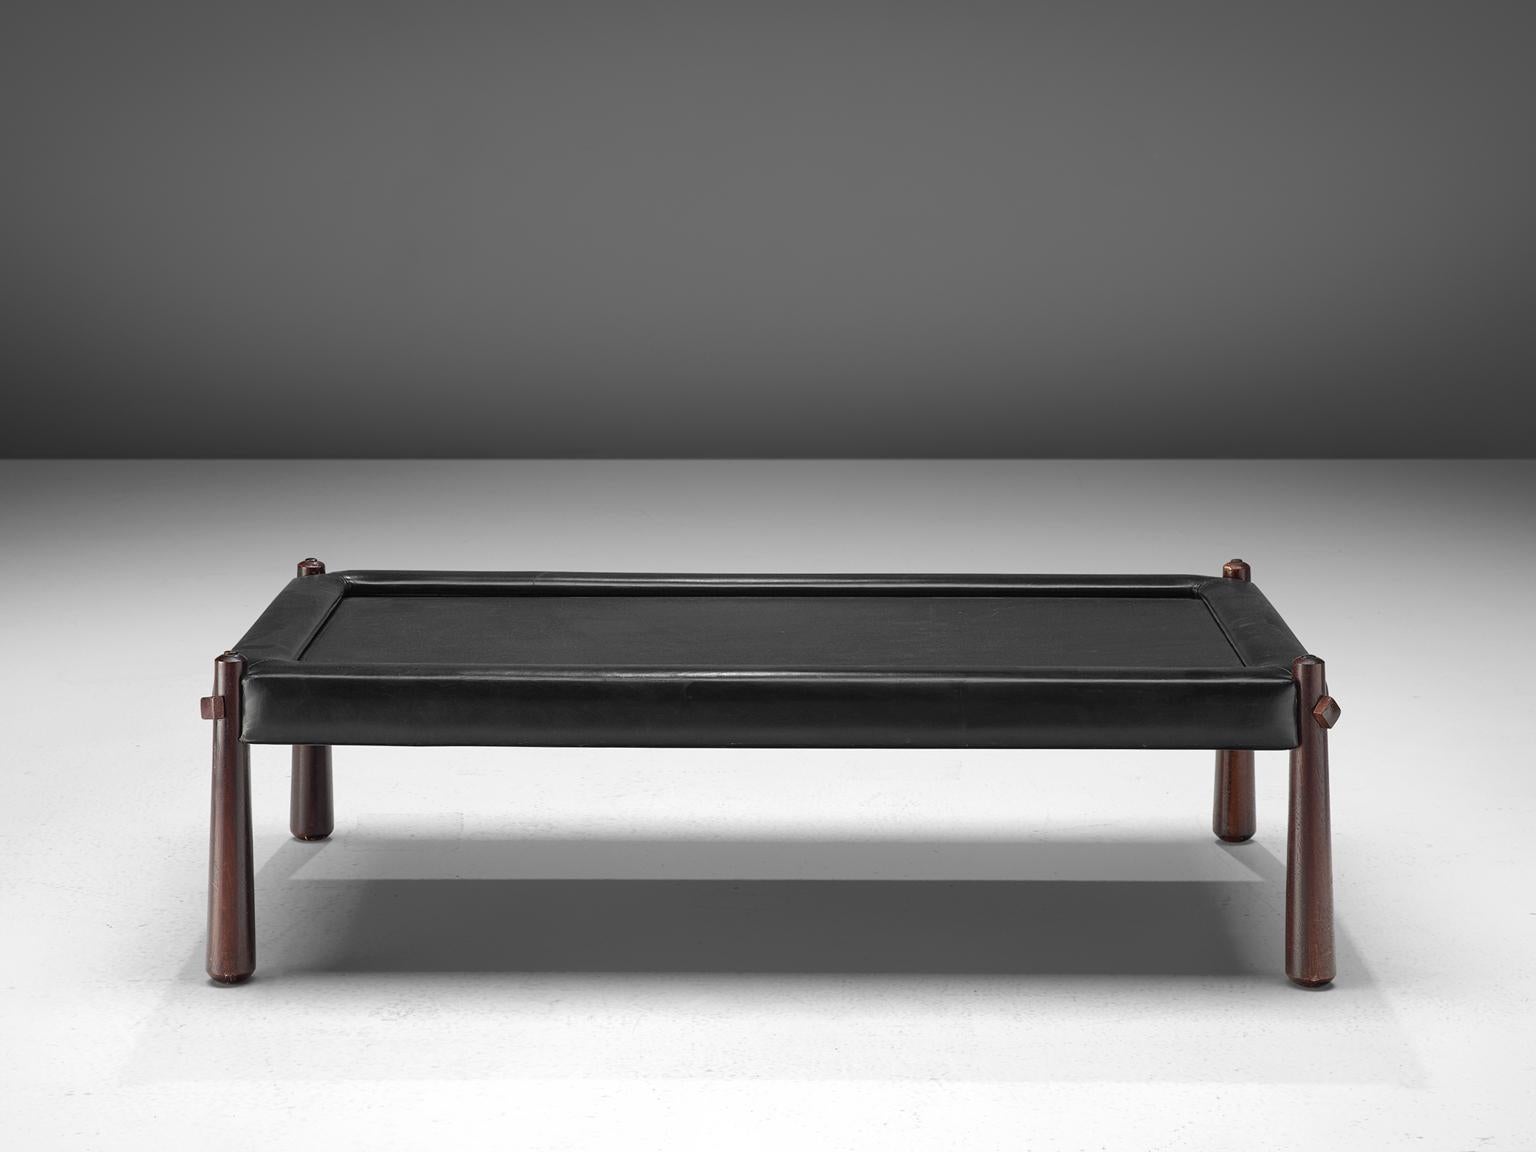 Percival Lafer, coffee table, slate, leather and rosewood, Brazil, 1970s.

This coffee table by Brazilian designer Percival Lafer features a slate chalkboard surface. The tabletop is embedded with black leather which is very notable. The rosewood